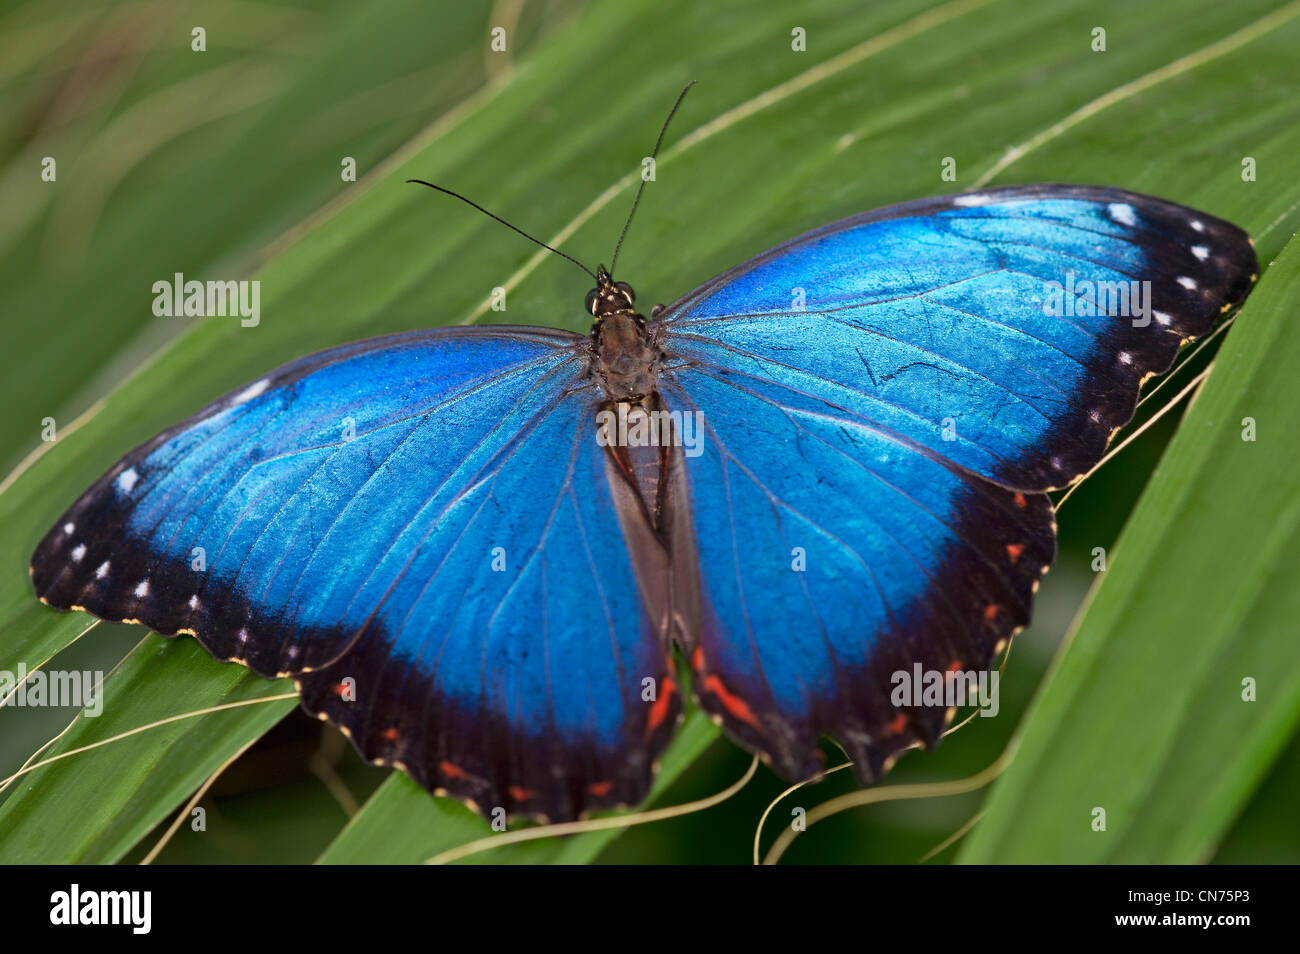 An adult Blue Morpho butterfly Stock Photo